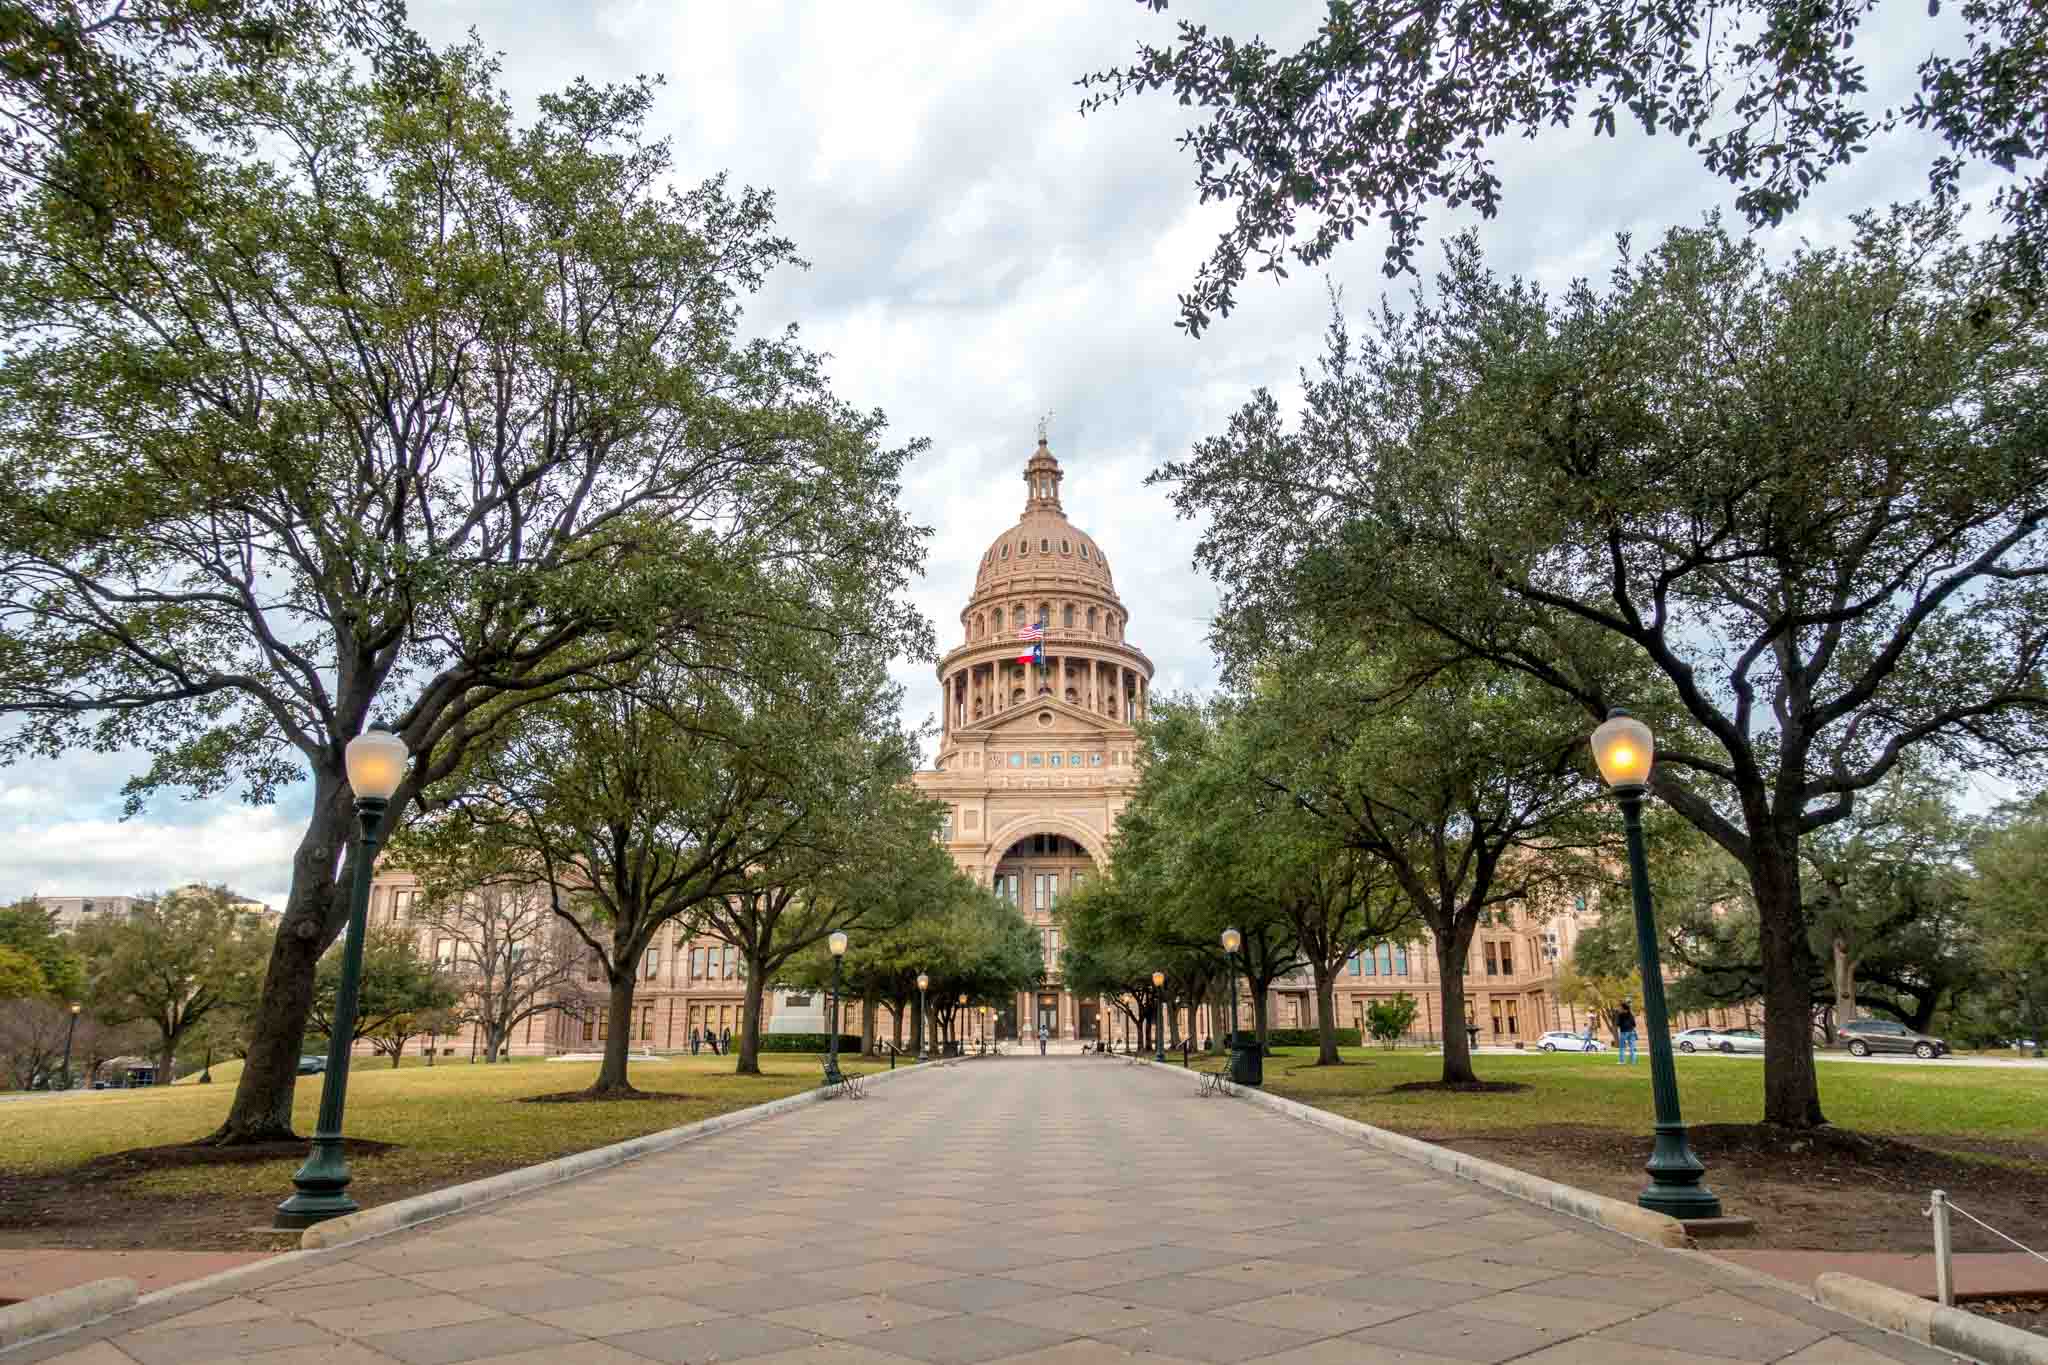 Texas State Capitol building